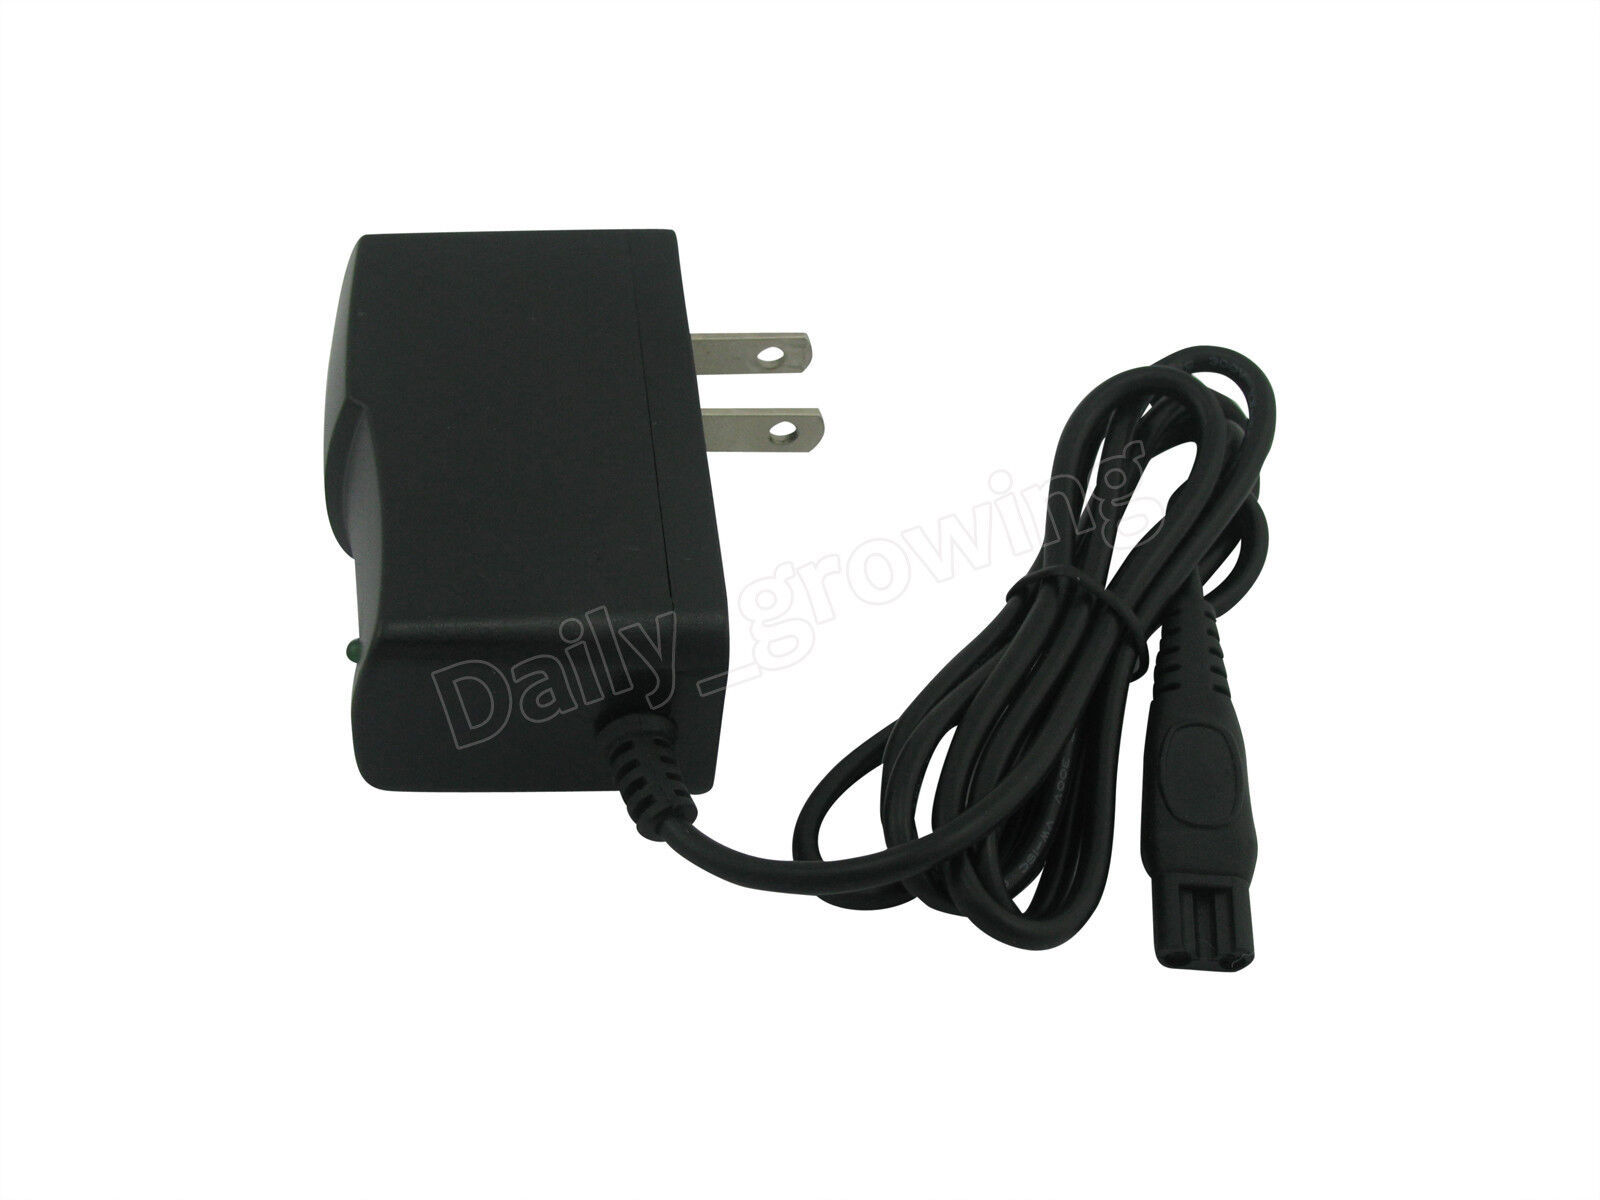 Power Supply Charger Cord Fits Philips Norelco 7864Xl 7865Xl 7866Xl Shaver - $18.99